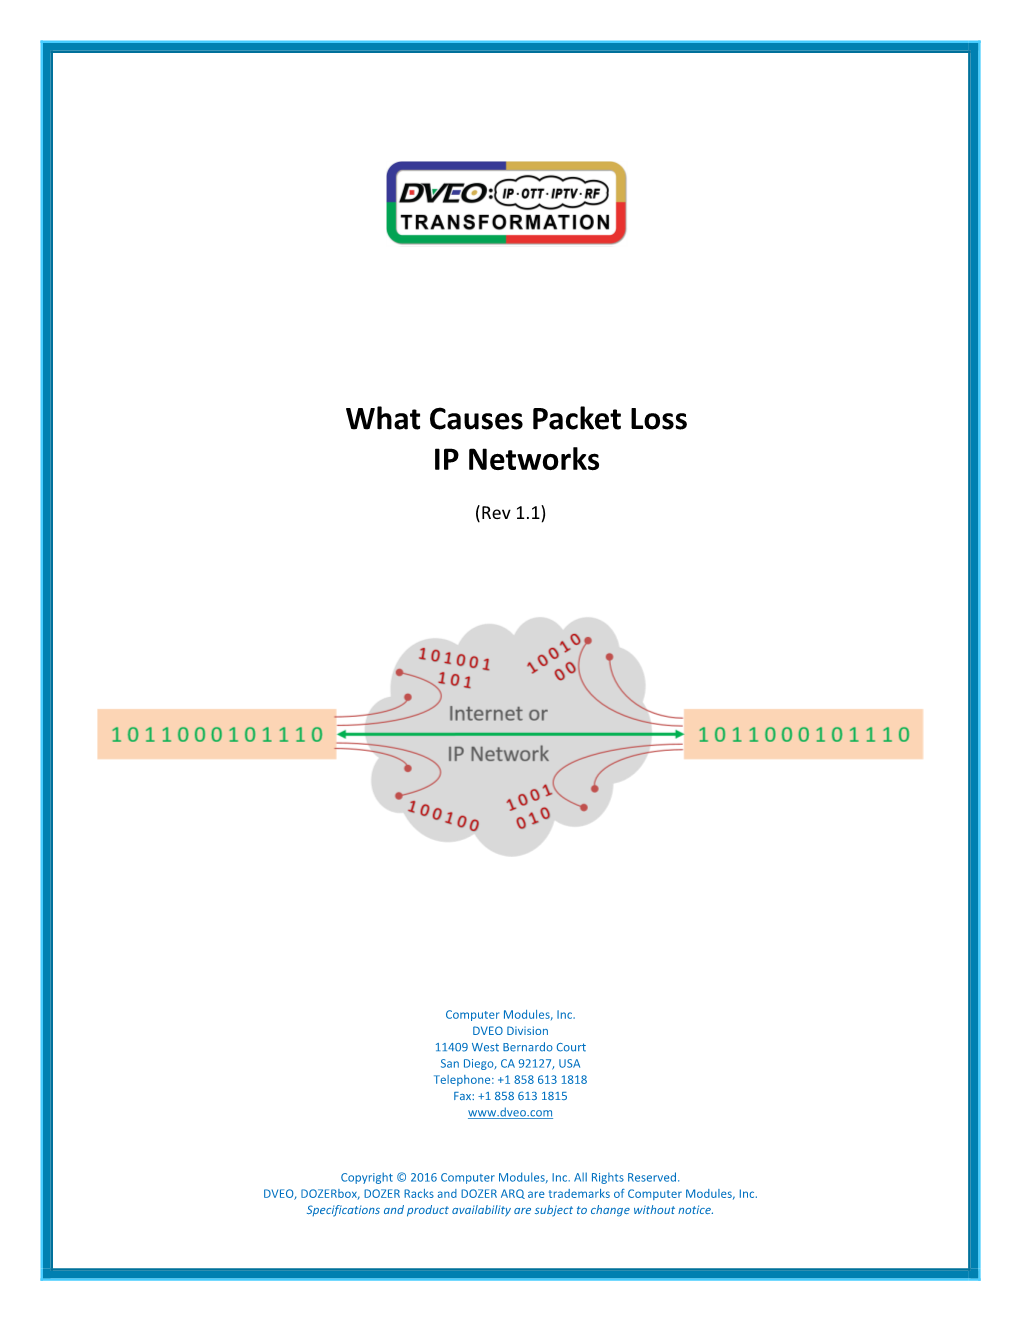 What Causes Packet Loss IP Networks